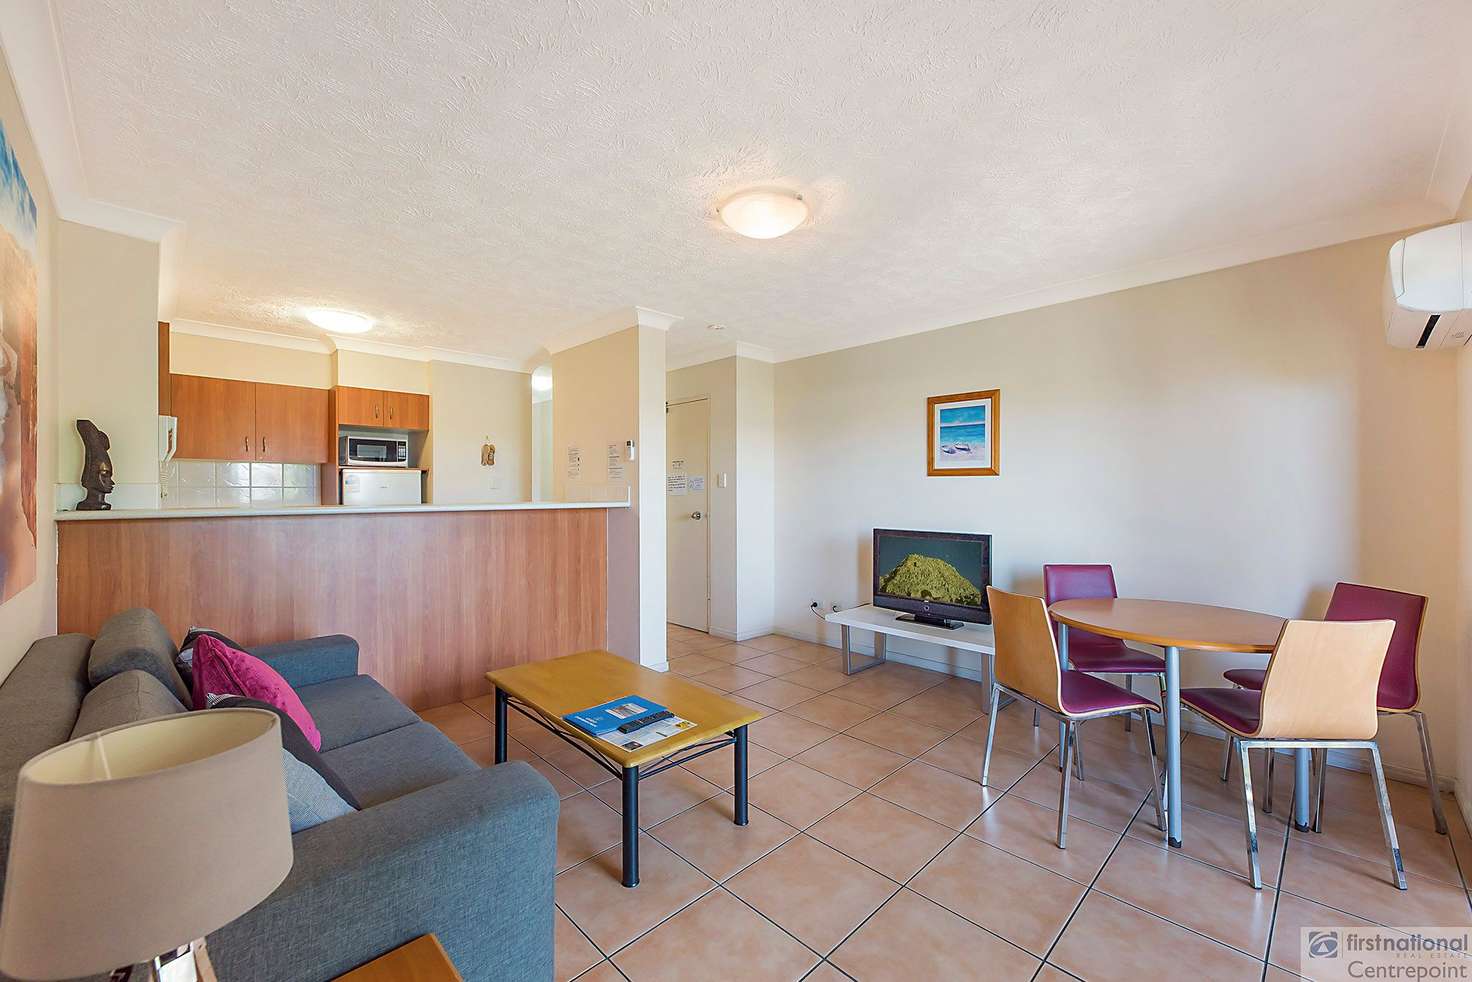 Main view of Homely apartment listing, 24/38 Petrel Ave, Mermaid Beach QLD 4218